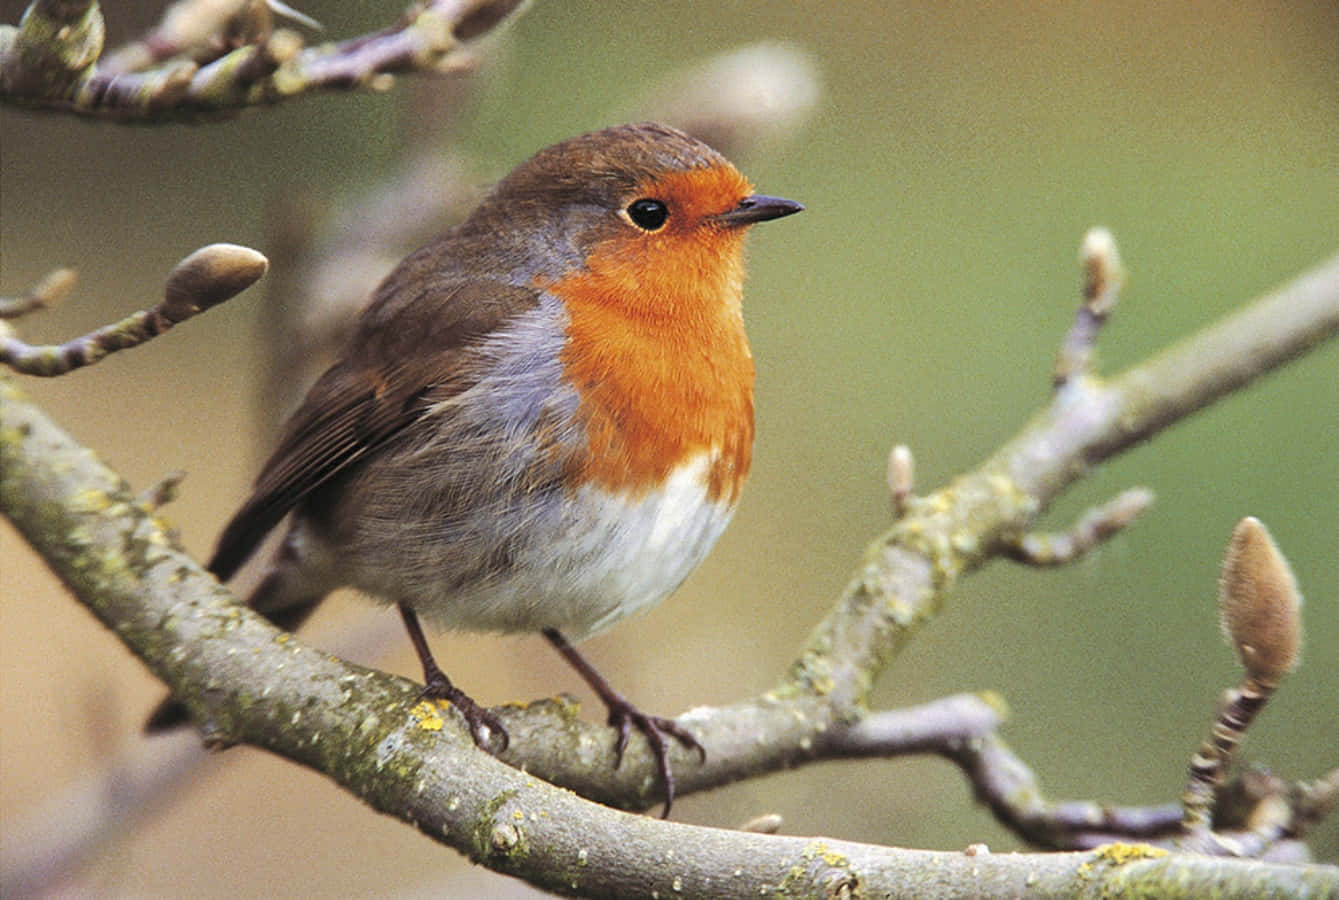 Little Robin Standing On a Tree Branch